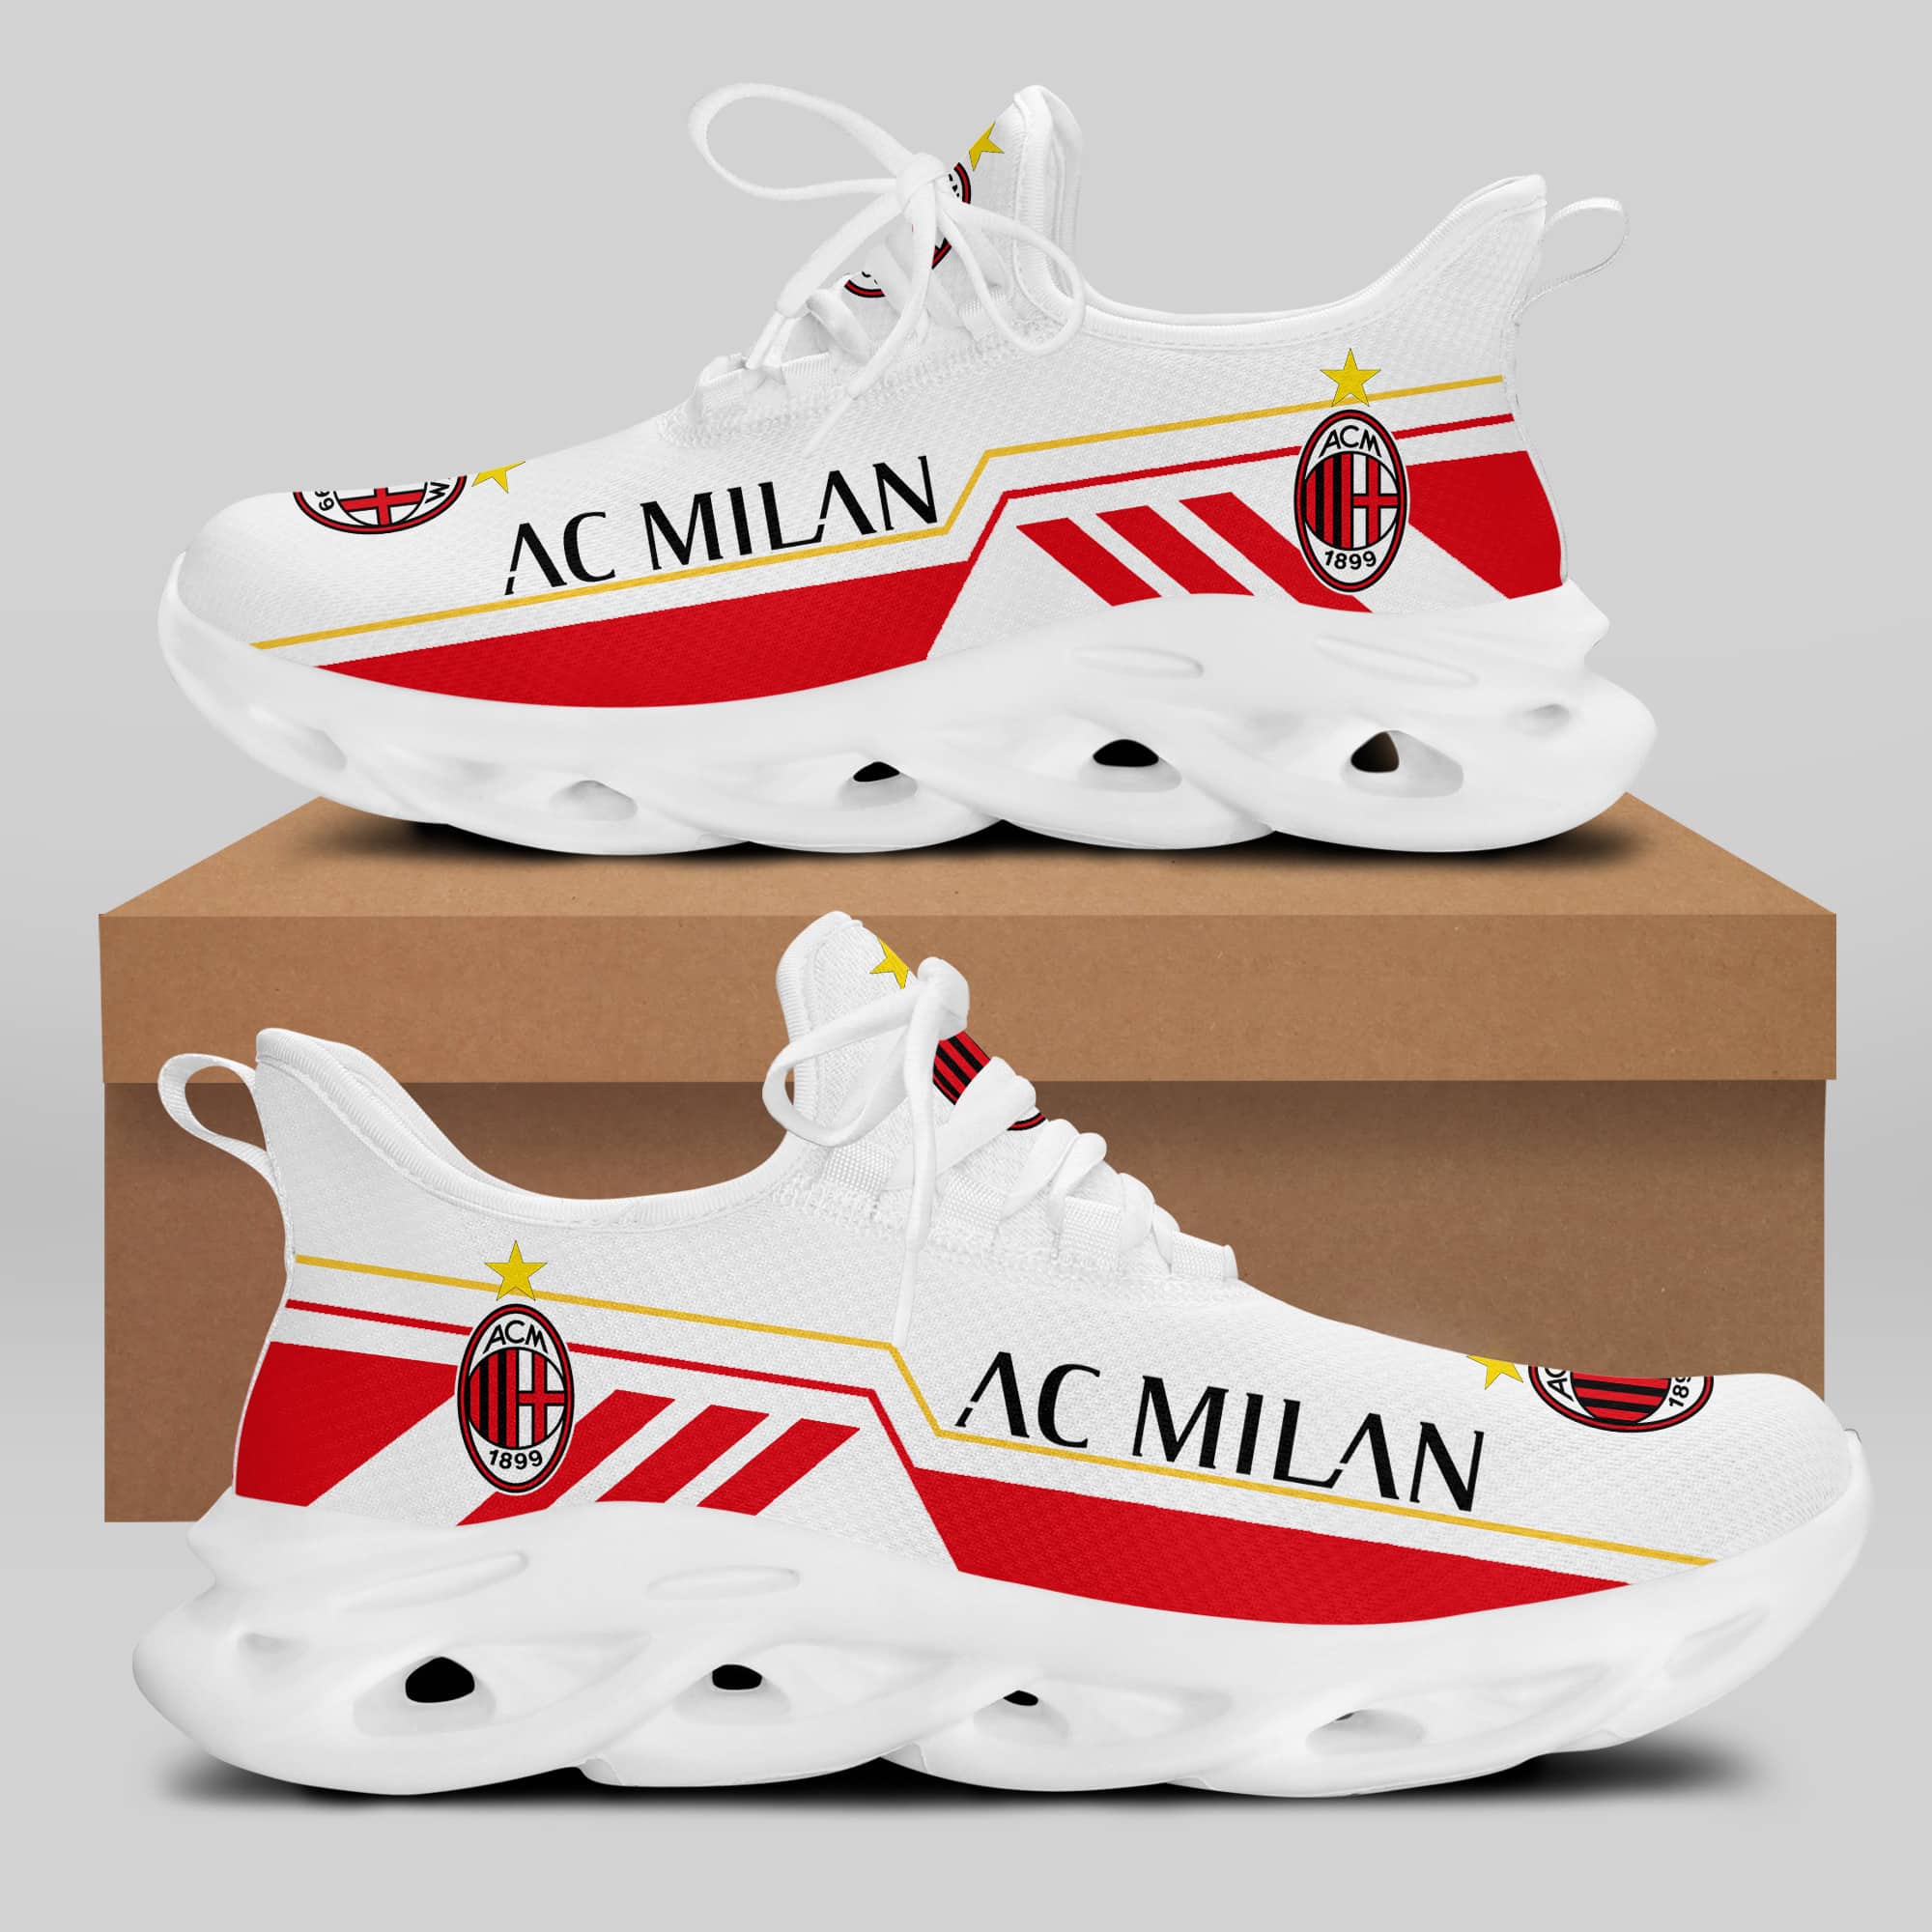 Ac Milan Running Shoes Max Soul Shoes Sneakers Ver 36 1